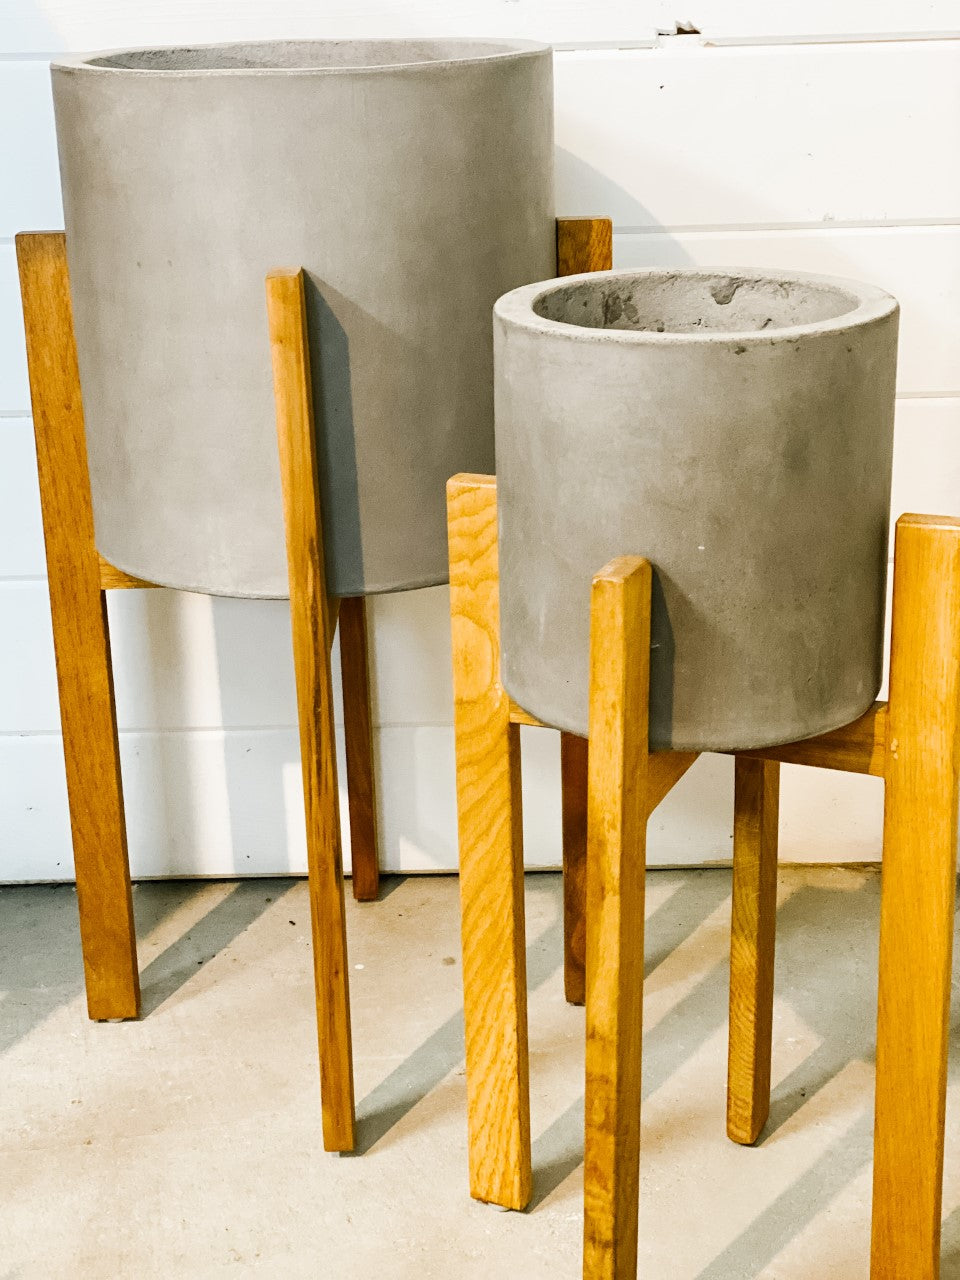 Grey Concrete Pot on Wood Stand- 2 sizes